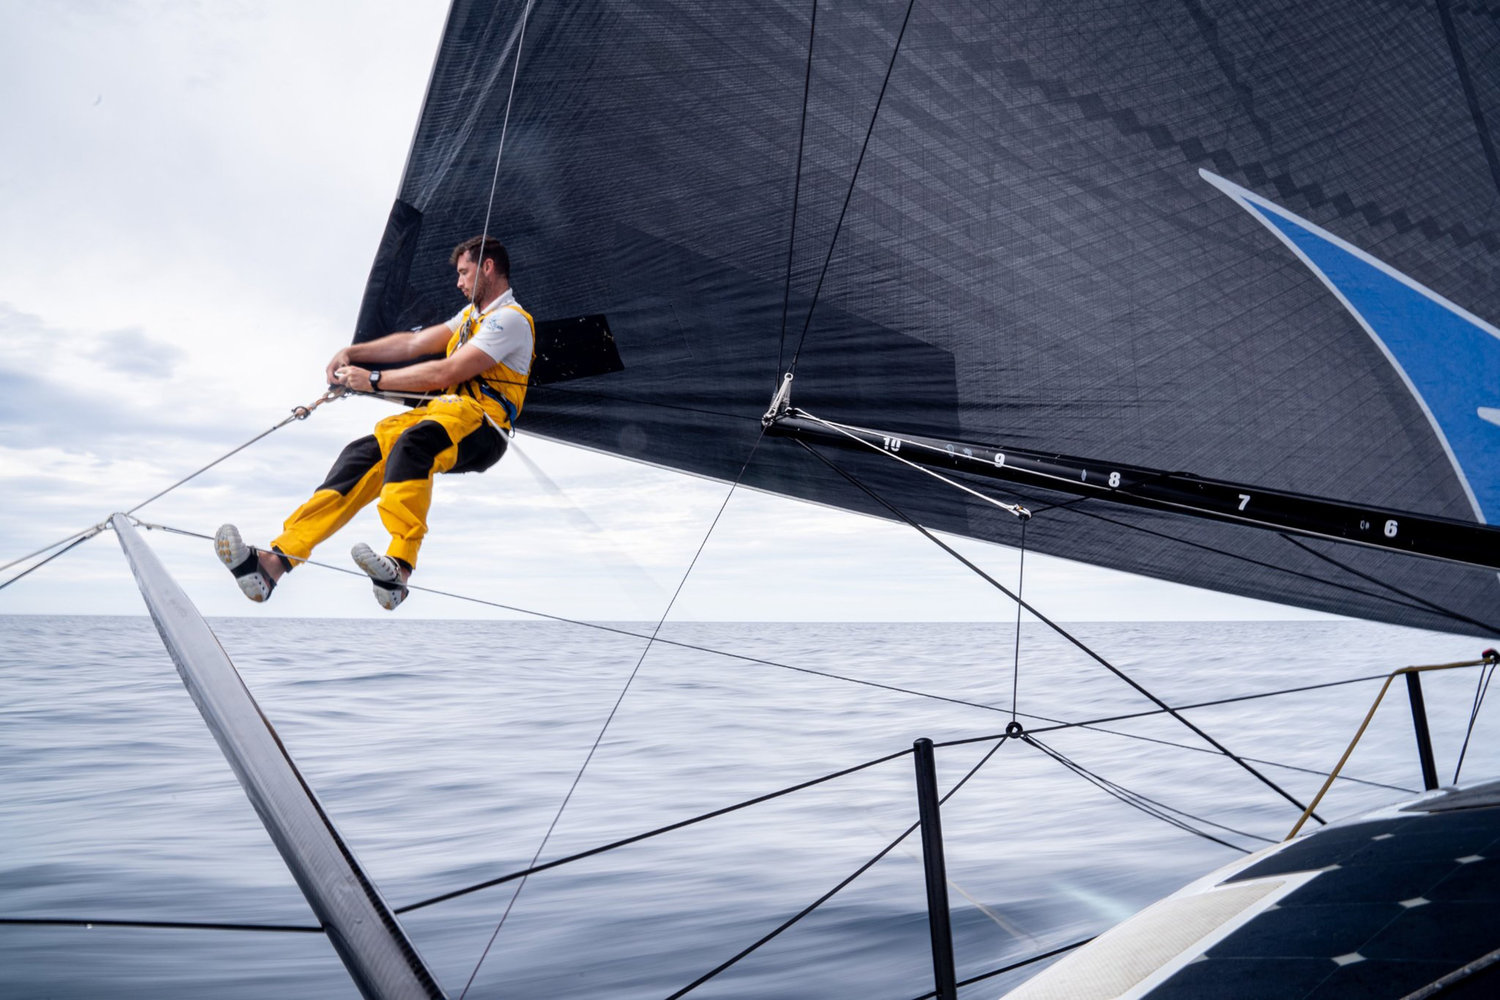 11th Hour Racing team media member Amory Ross of Newport took this photo of sailor Jack Bouttell on Aug. 3, during the team’s voyage back to France to train before the race in January.